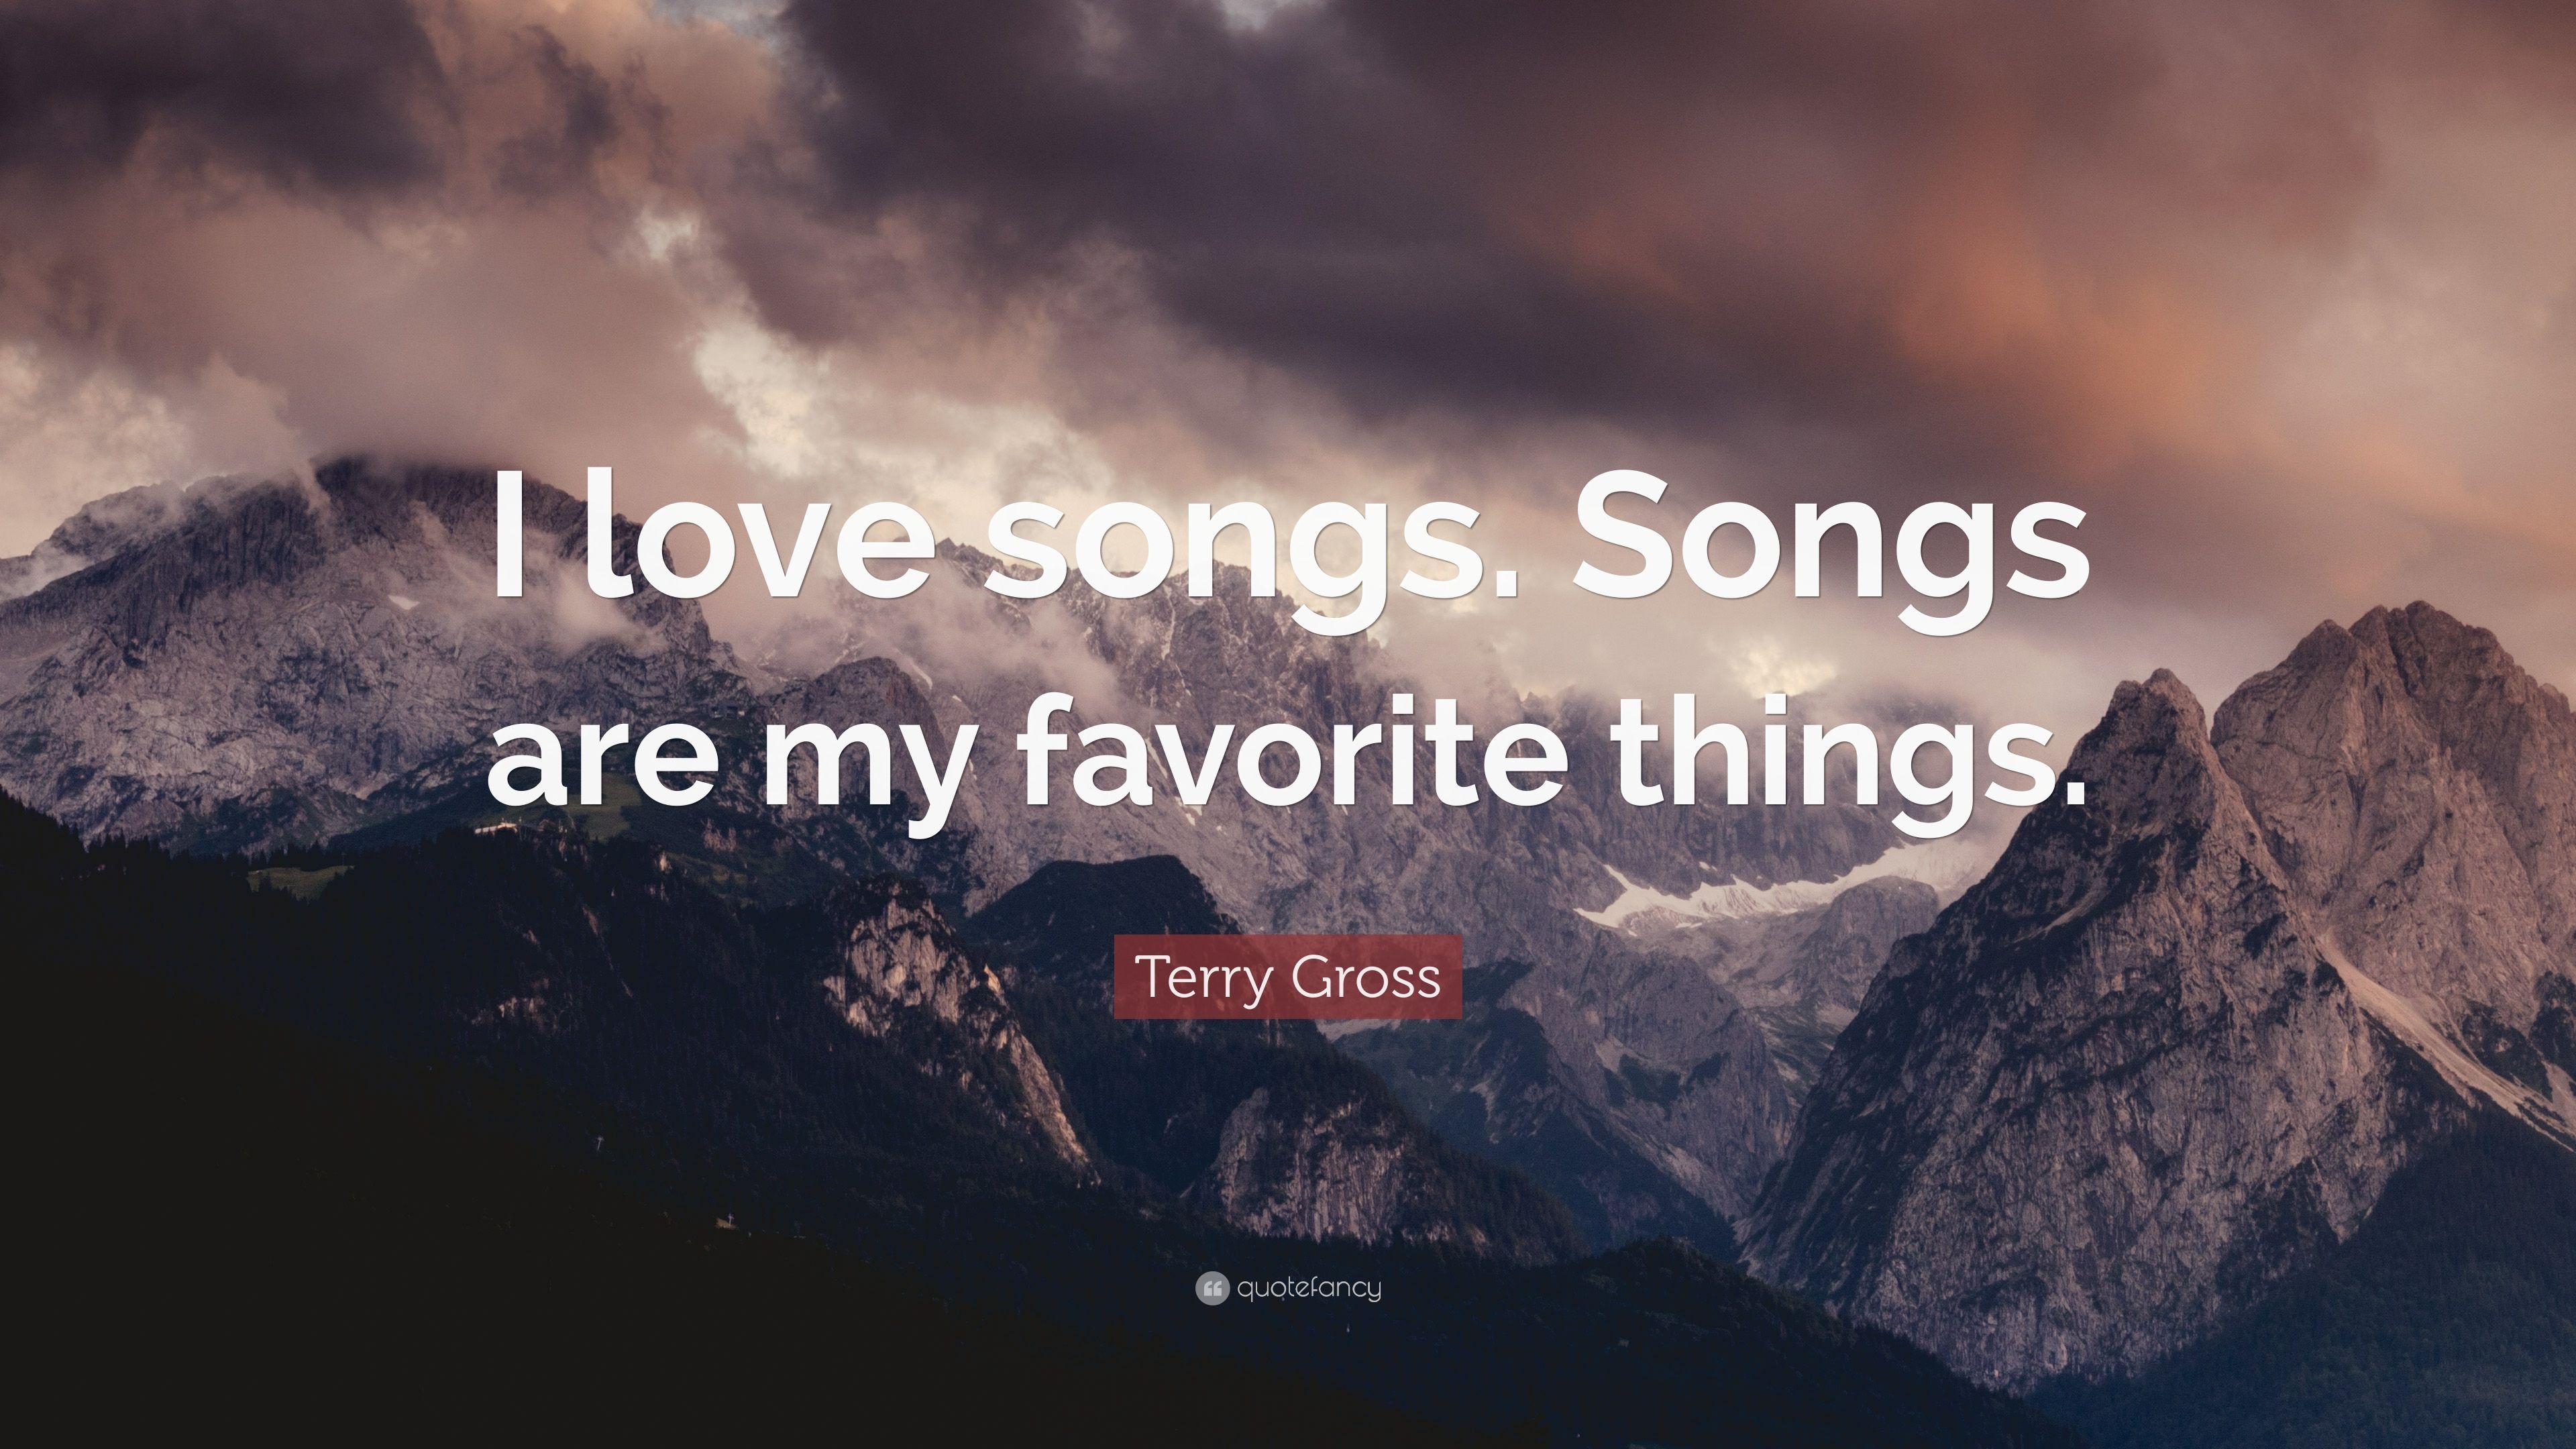 Terry Gross Quote: “I love songs. Songs are my favorite things